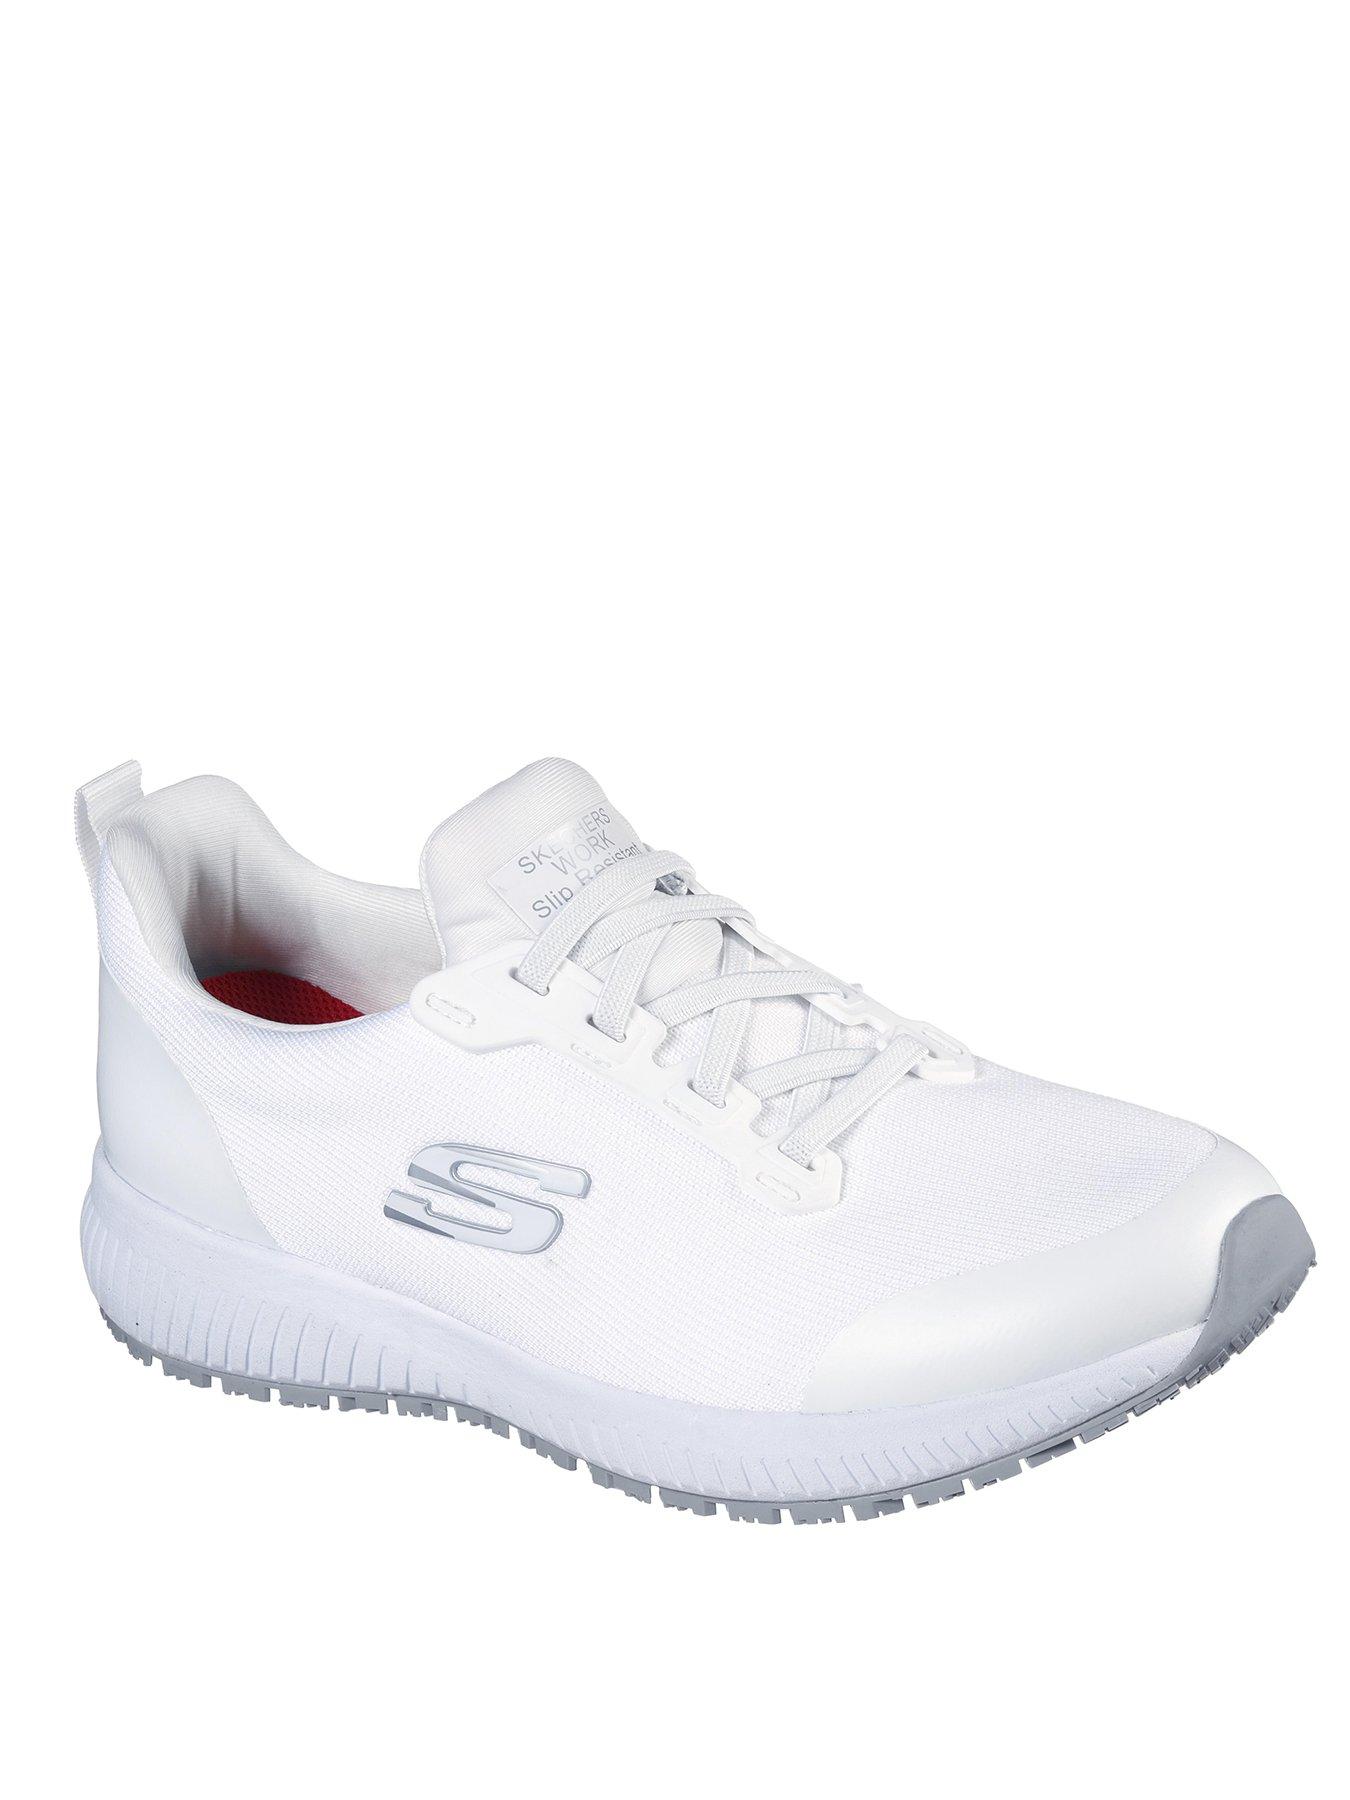 Skechers Squad SR Safety Slip Resistant Trainers White very.co.uk